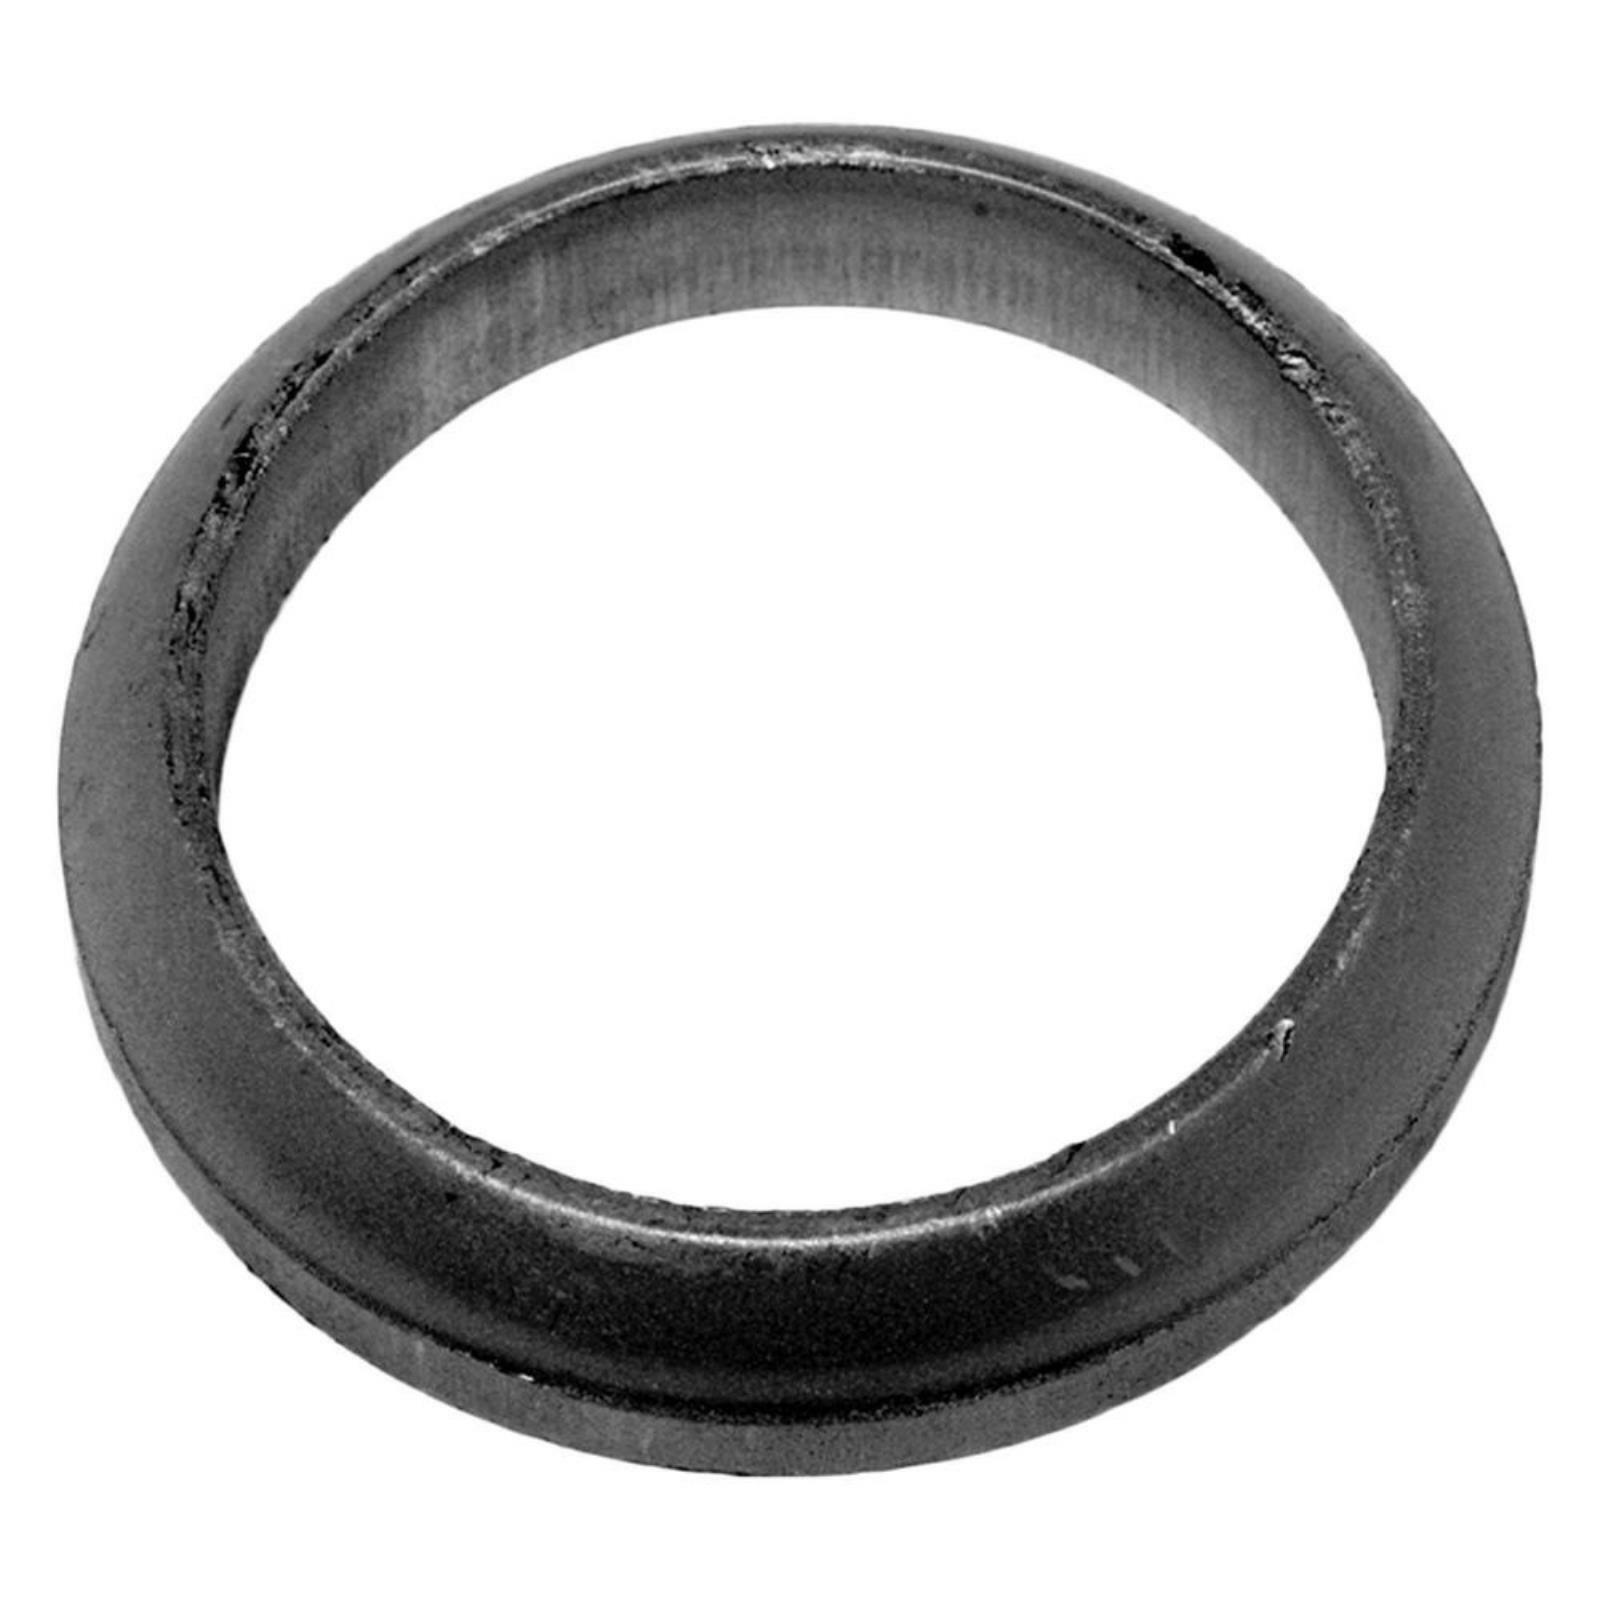 Graphoil Donut Exhaust Pipe Flange Gasket Fits 1989-1995 GEO Tracker